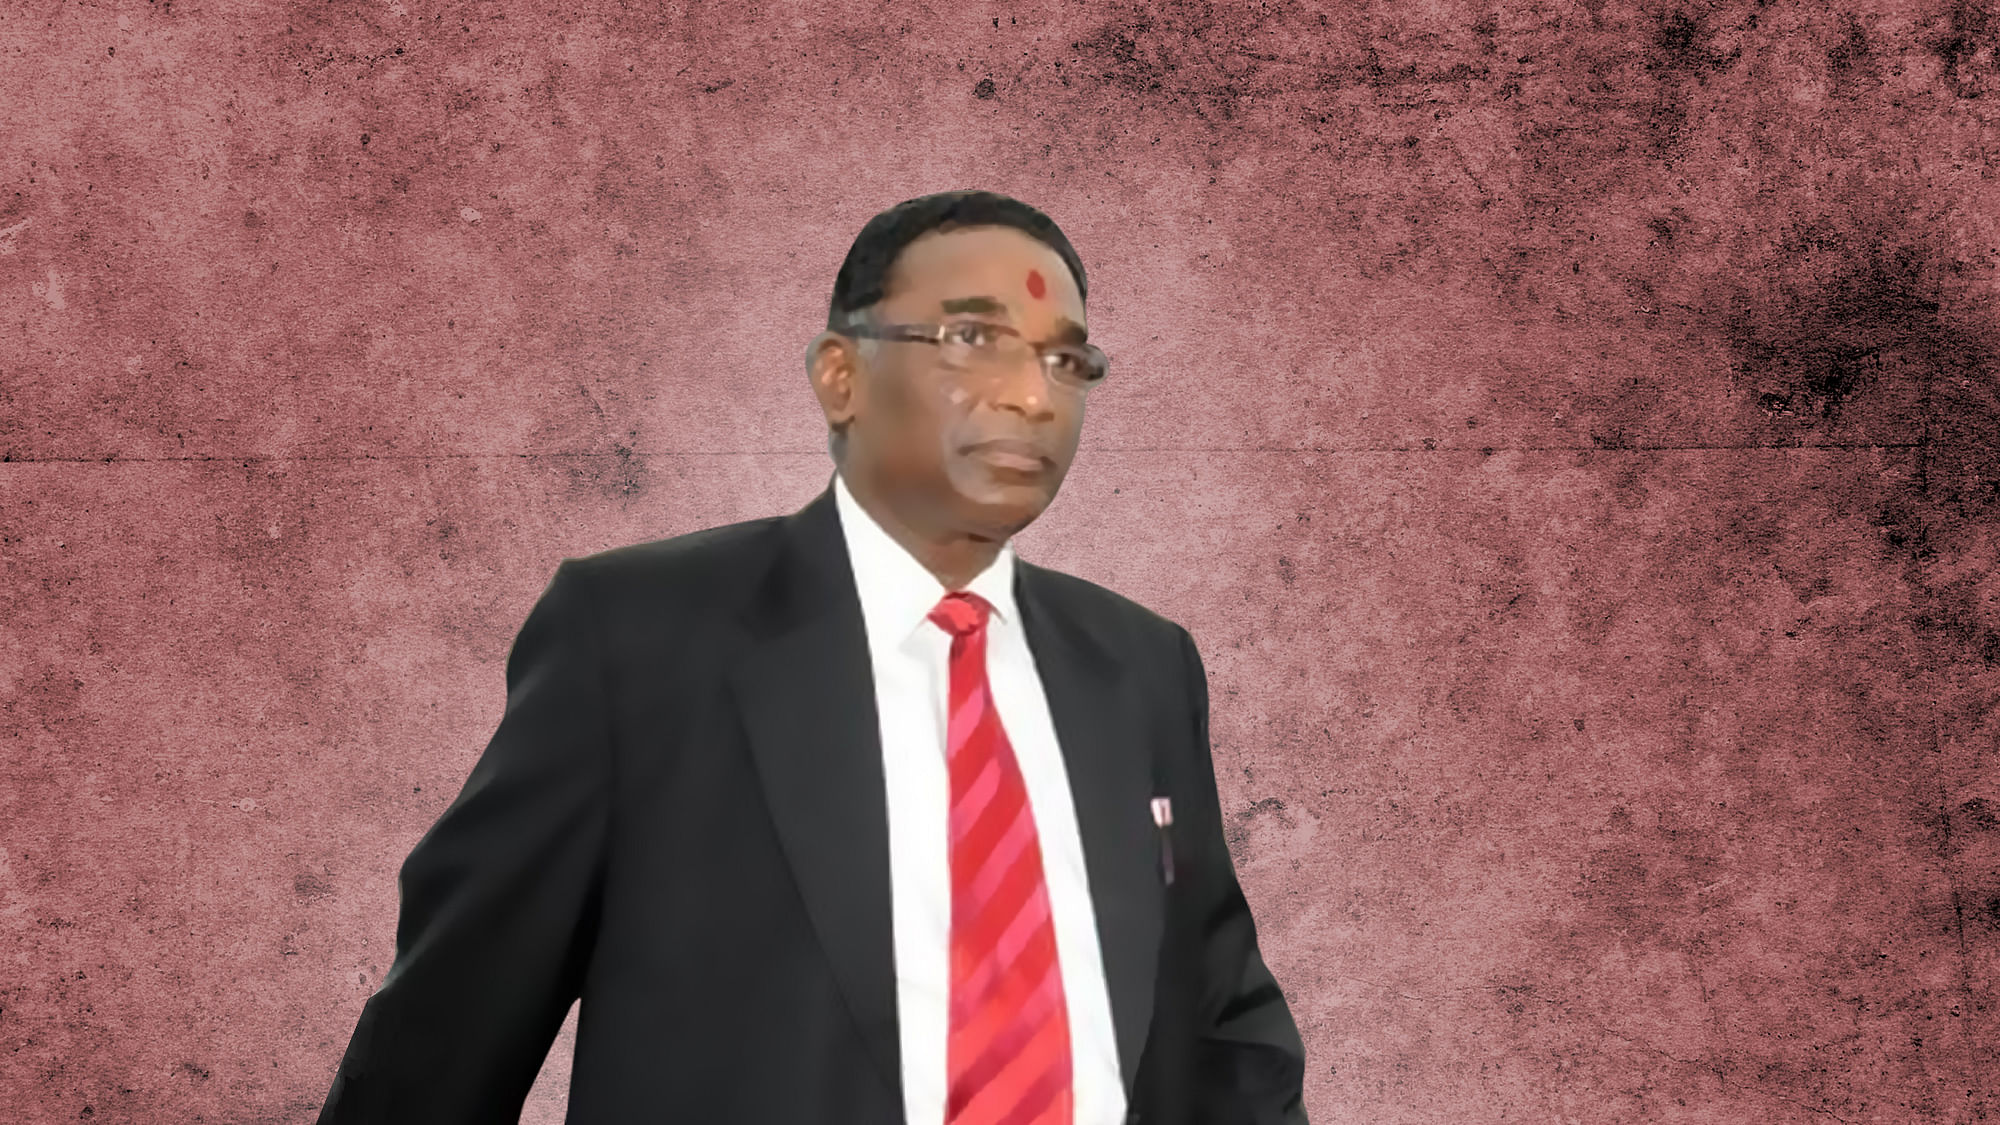 Justice Chelameshwar, who heard the matter along with Justice Nazeer.